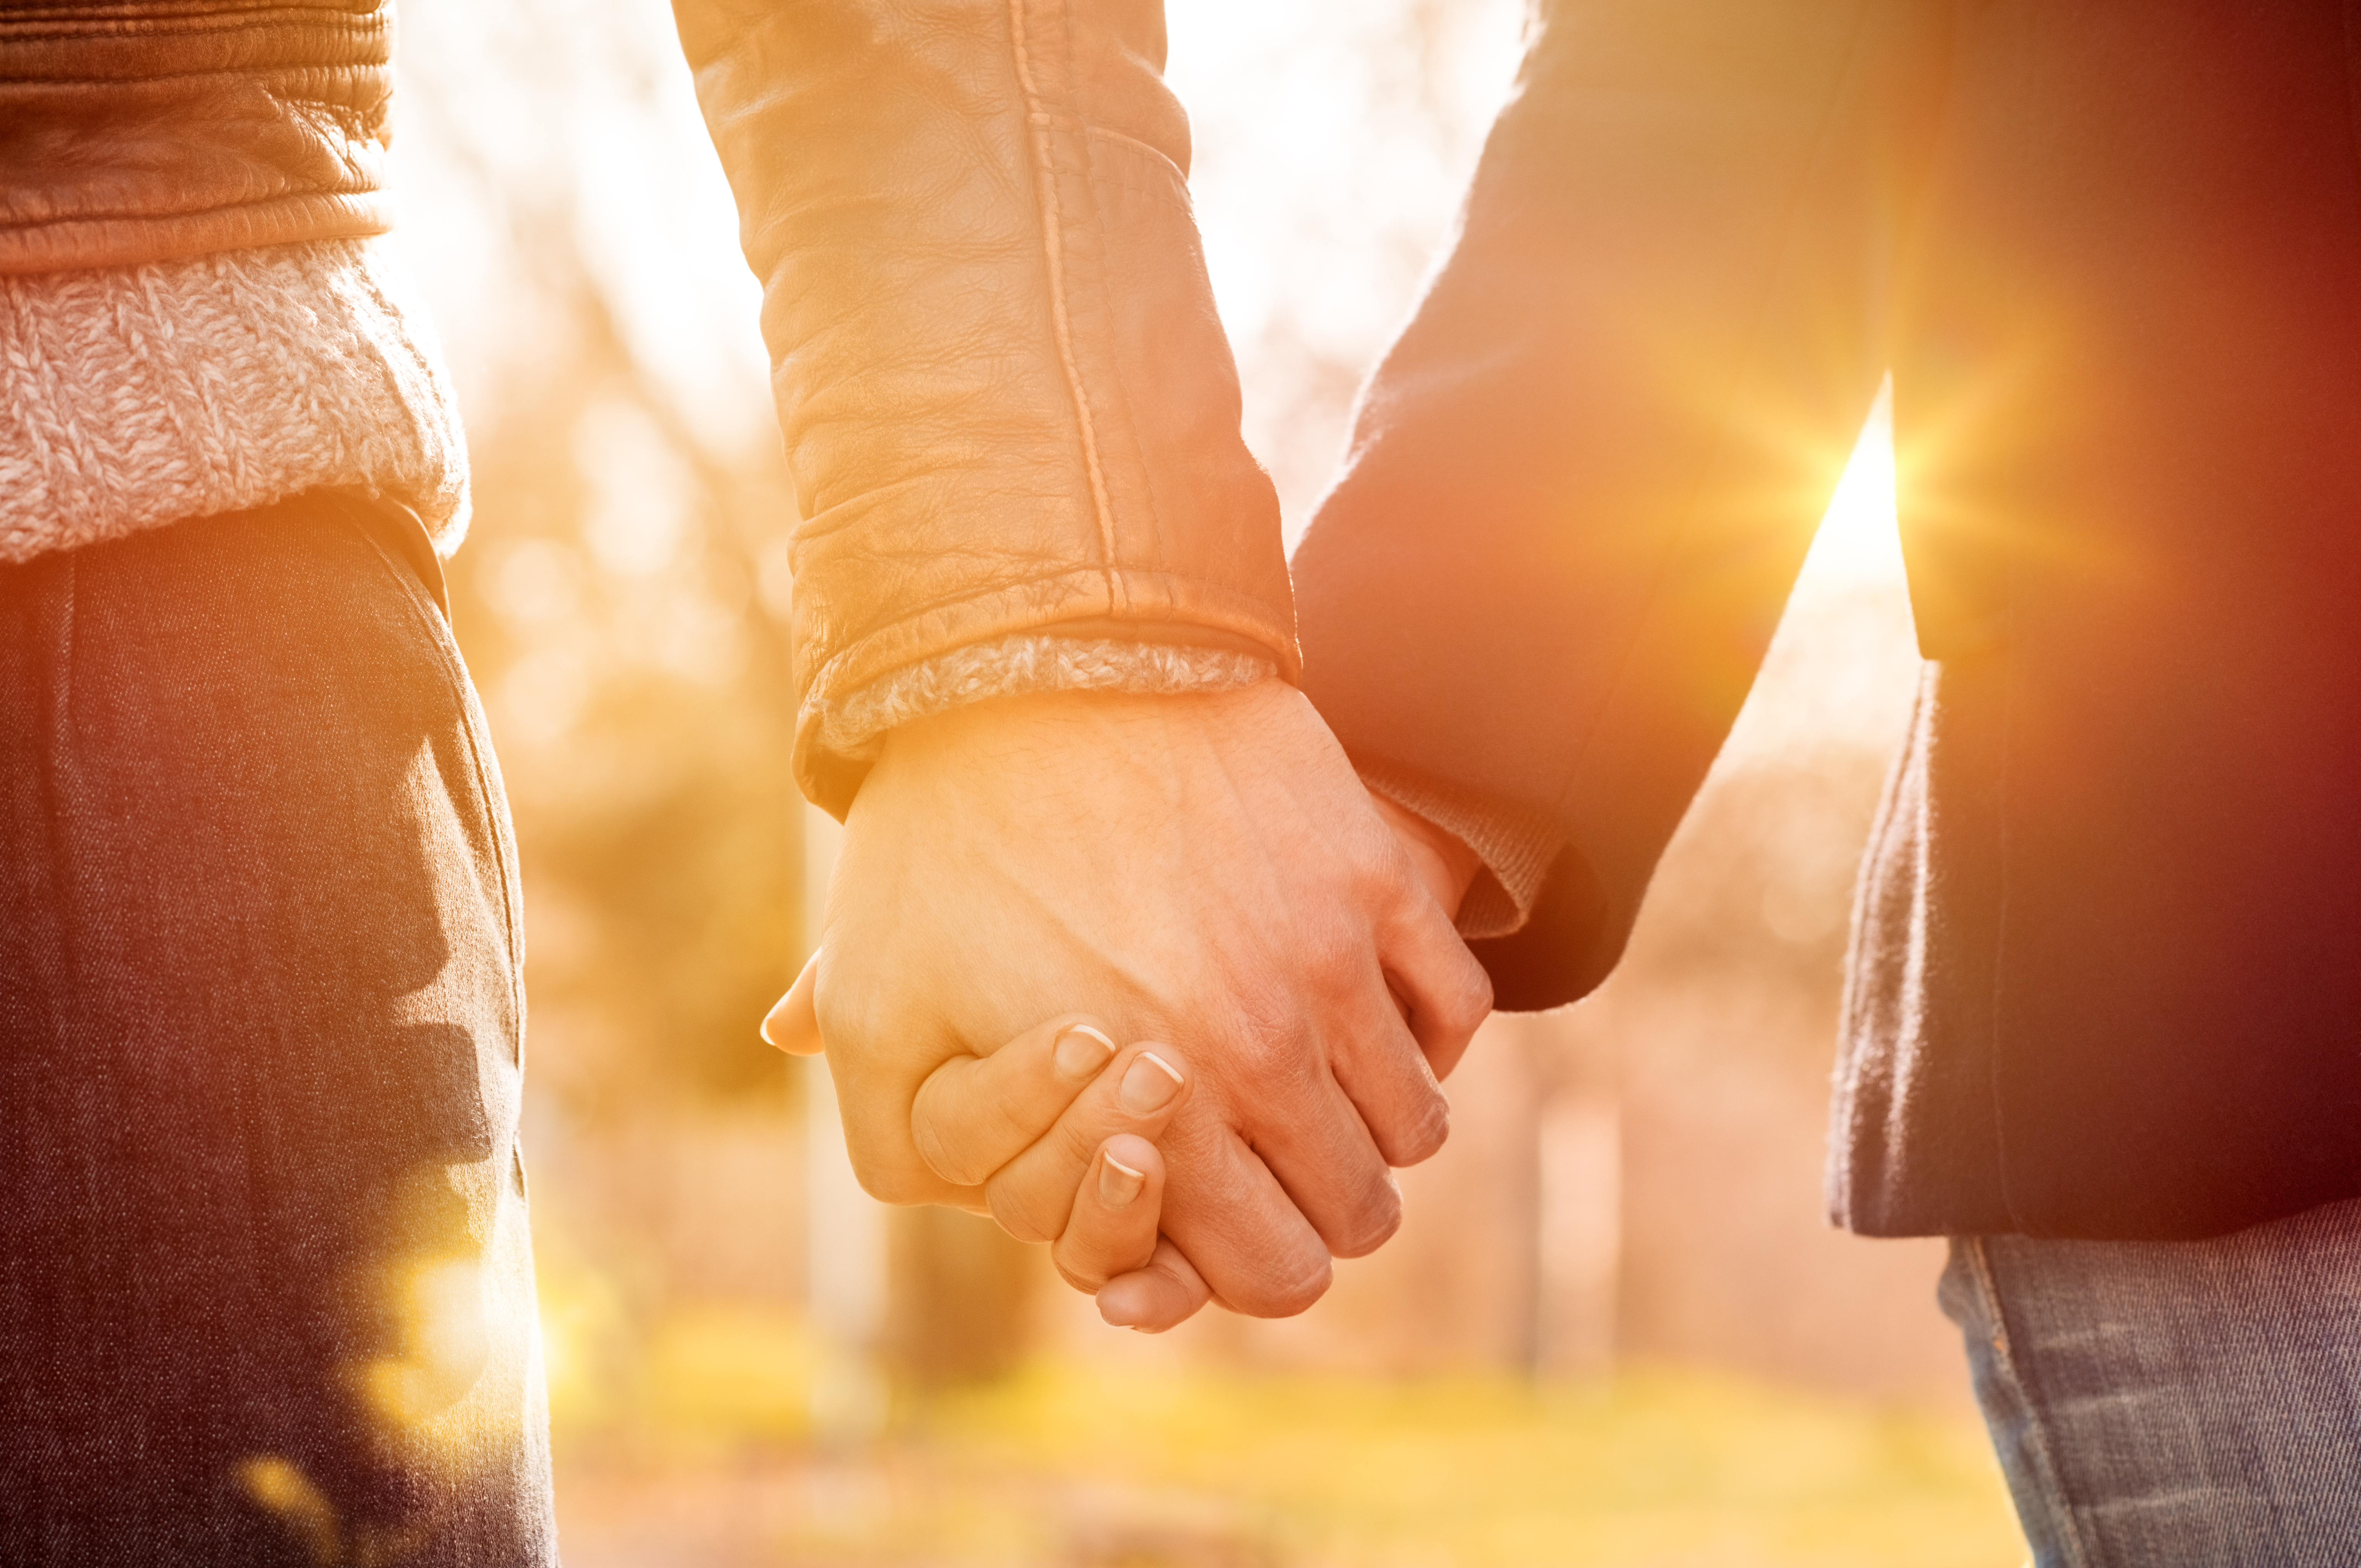 Close-up of a couple holding hands | Source: Shutterstock